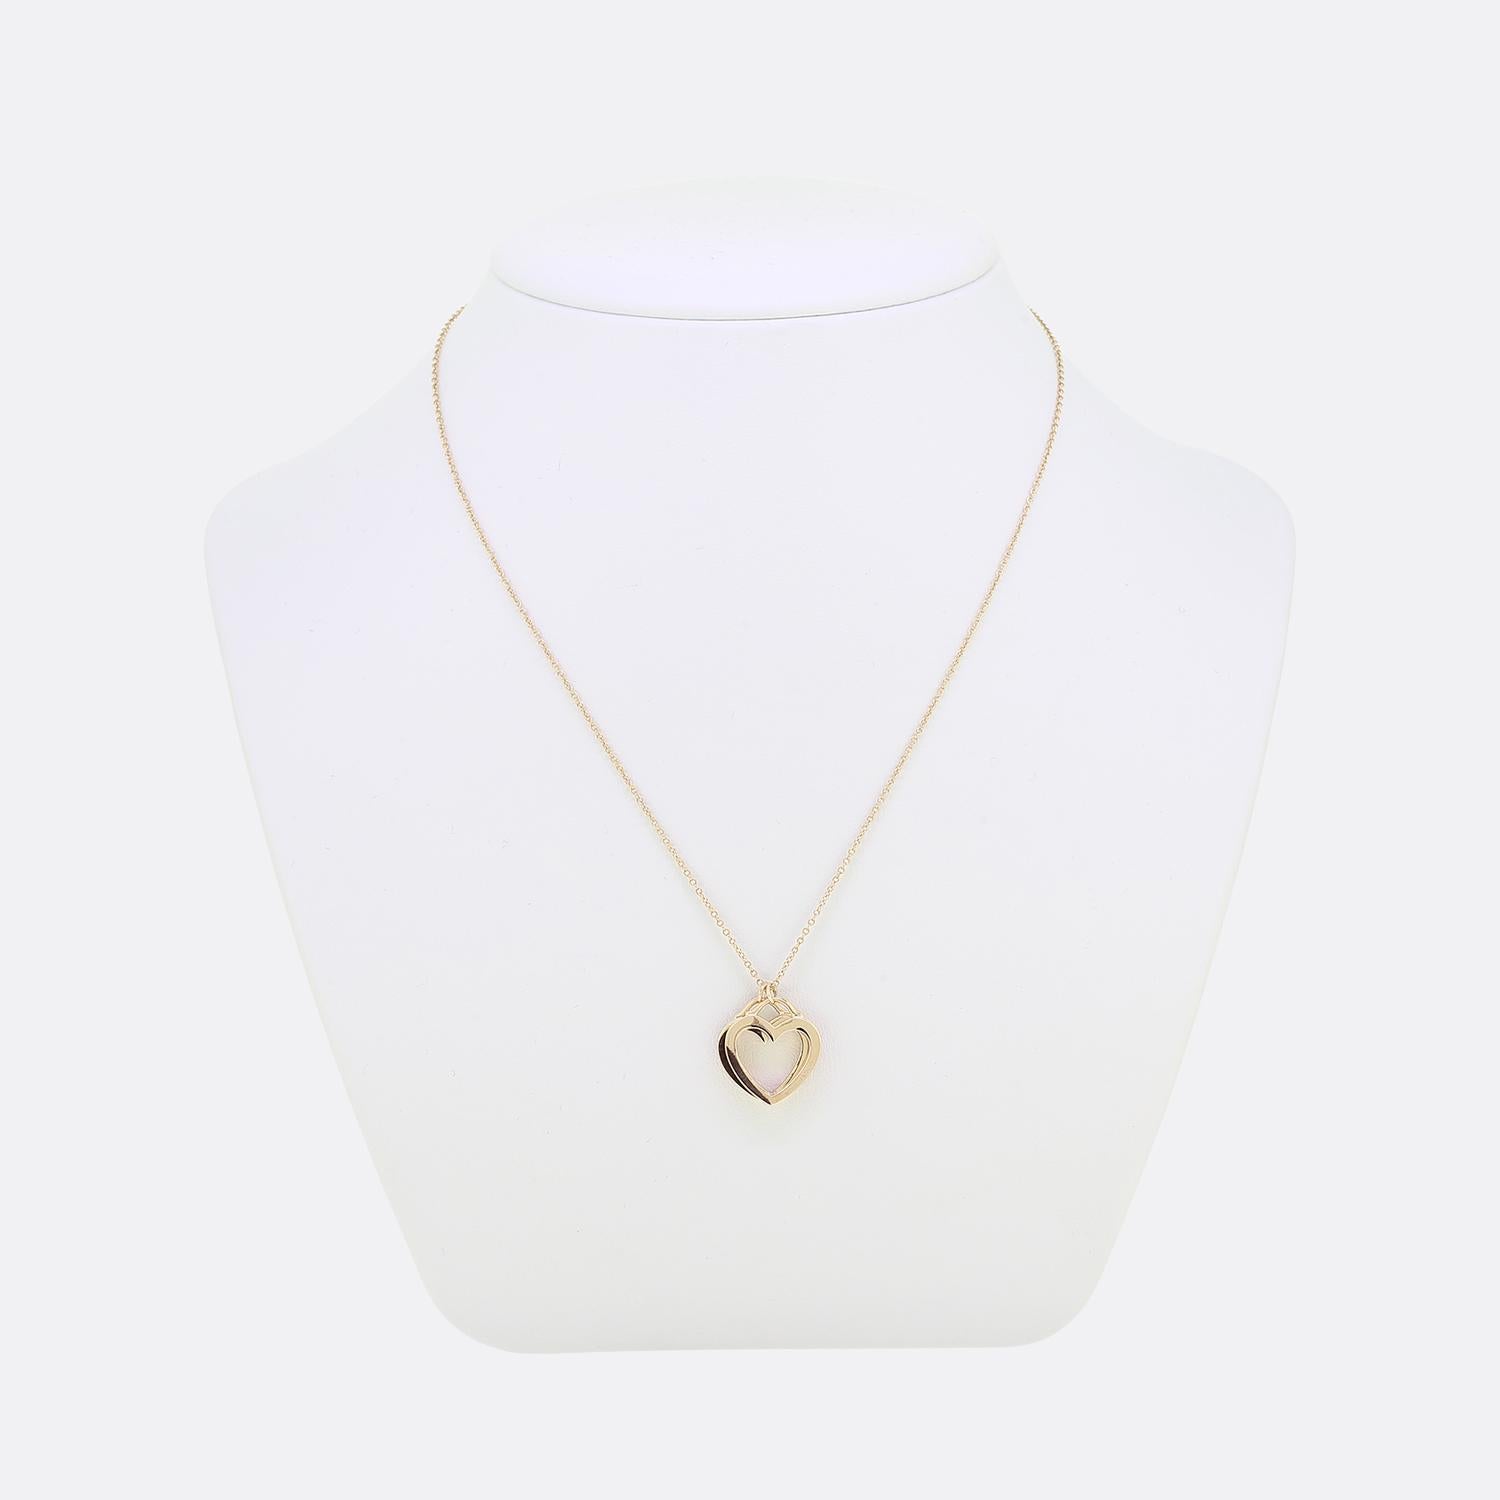 Here we have a wonderful necklace from the world renowned luxury jewellery designer Tiffany & Co. The necklace features two open hearts that can slide up and down the chain. It is crafted in 18ct rose gold and is a rare model.


Condition: Used